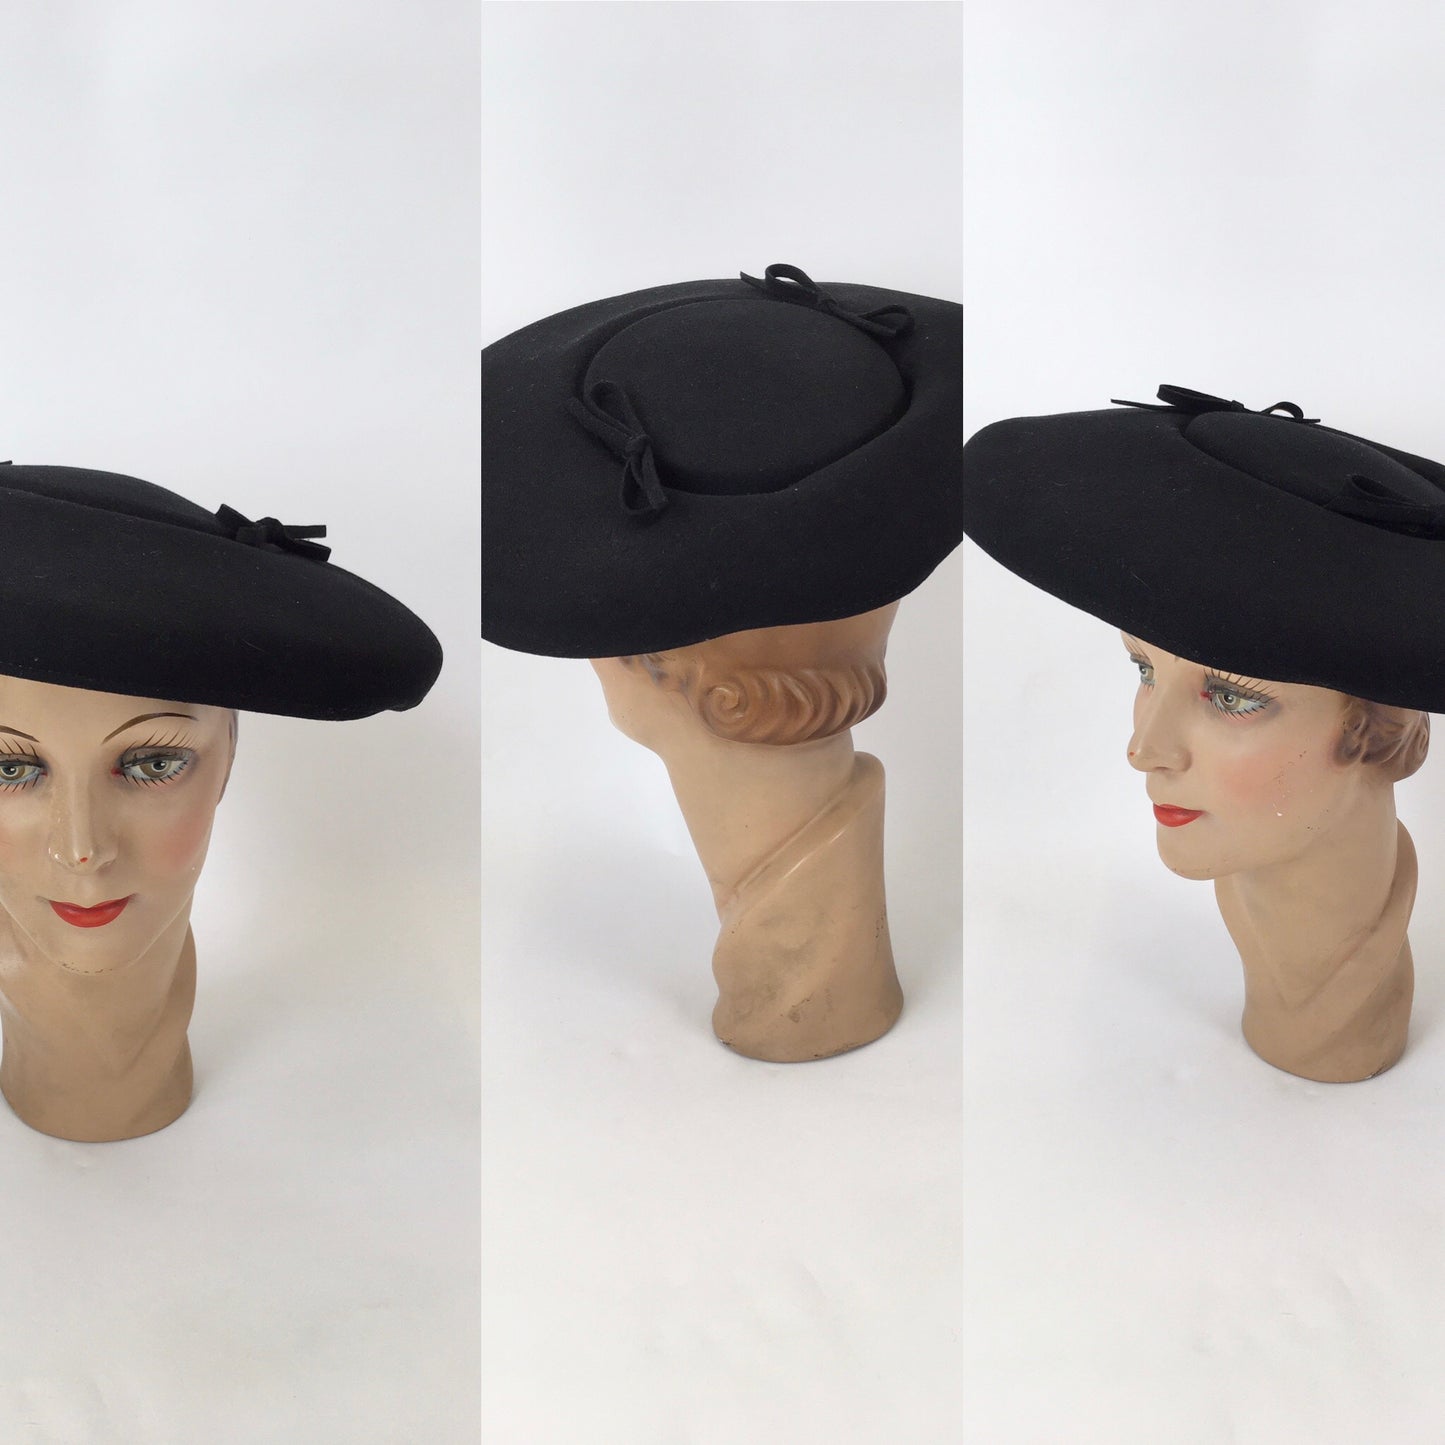 Original 1950’s Black Platter Hat - Stunning New Look Style Shape with Bow Adornments